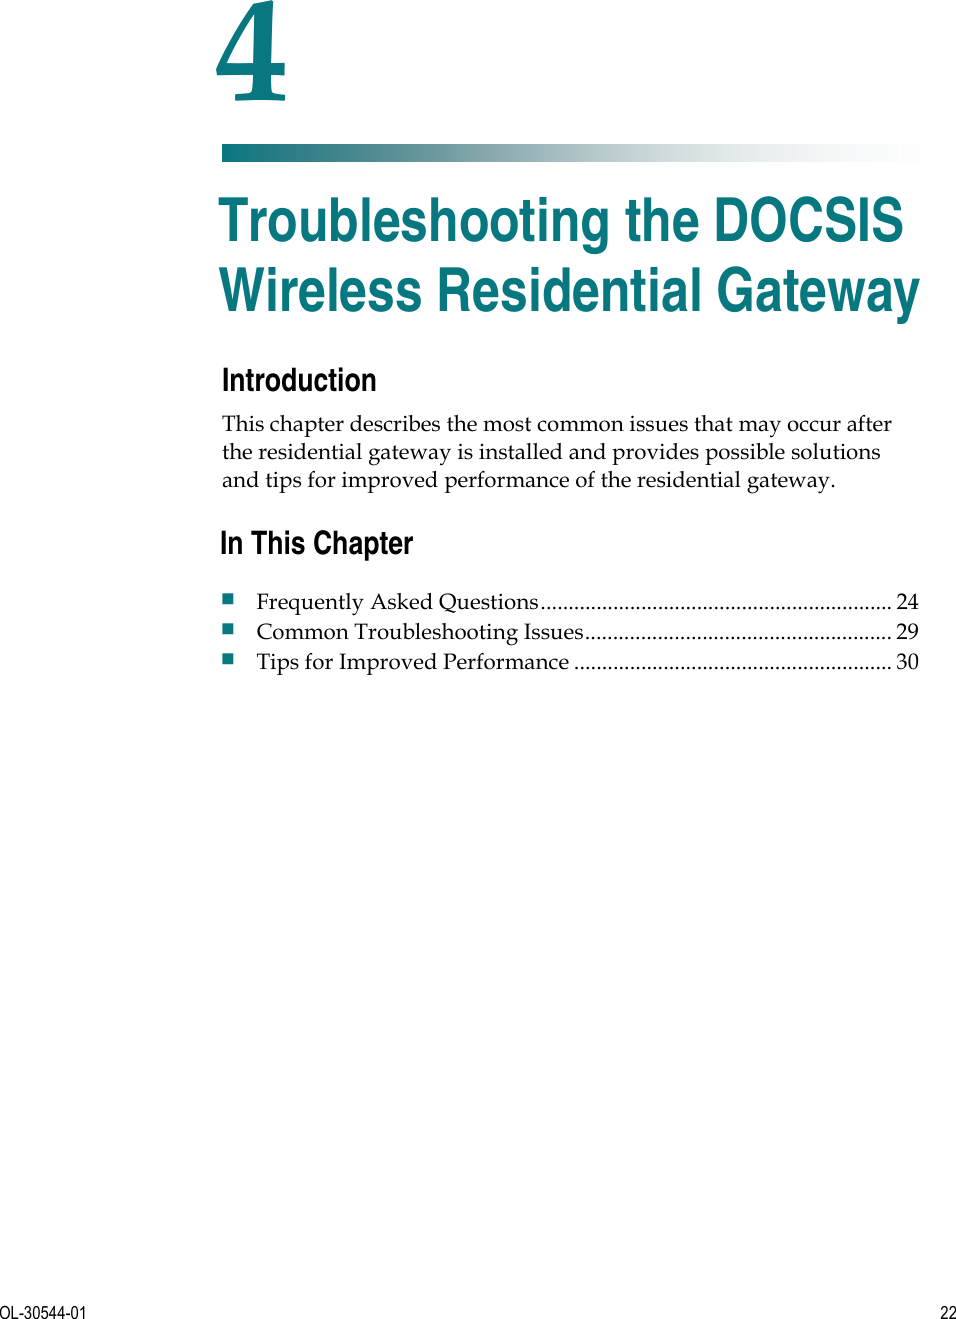   OL-30544-01  22  Introduction This chapter describes the most common issues that may occur after the residential gateway is installed and provides possible solutions and tips for improved performance of the residential gateway.    4 Chapter 4 Troubleshooting the DOCSIS Wireless Residential Gateway In This Chapter Frequently Asked Questions............................................................... 24 Common Troubleshooting Issues....................................................... 29 Tips for Improved Performance ......................................................... 30 